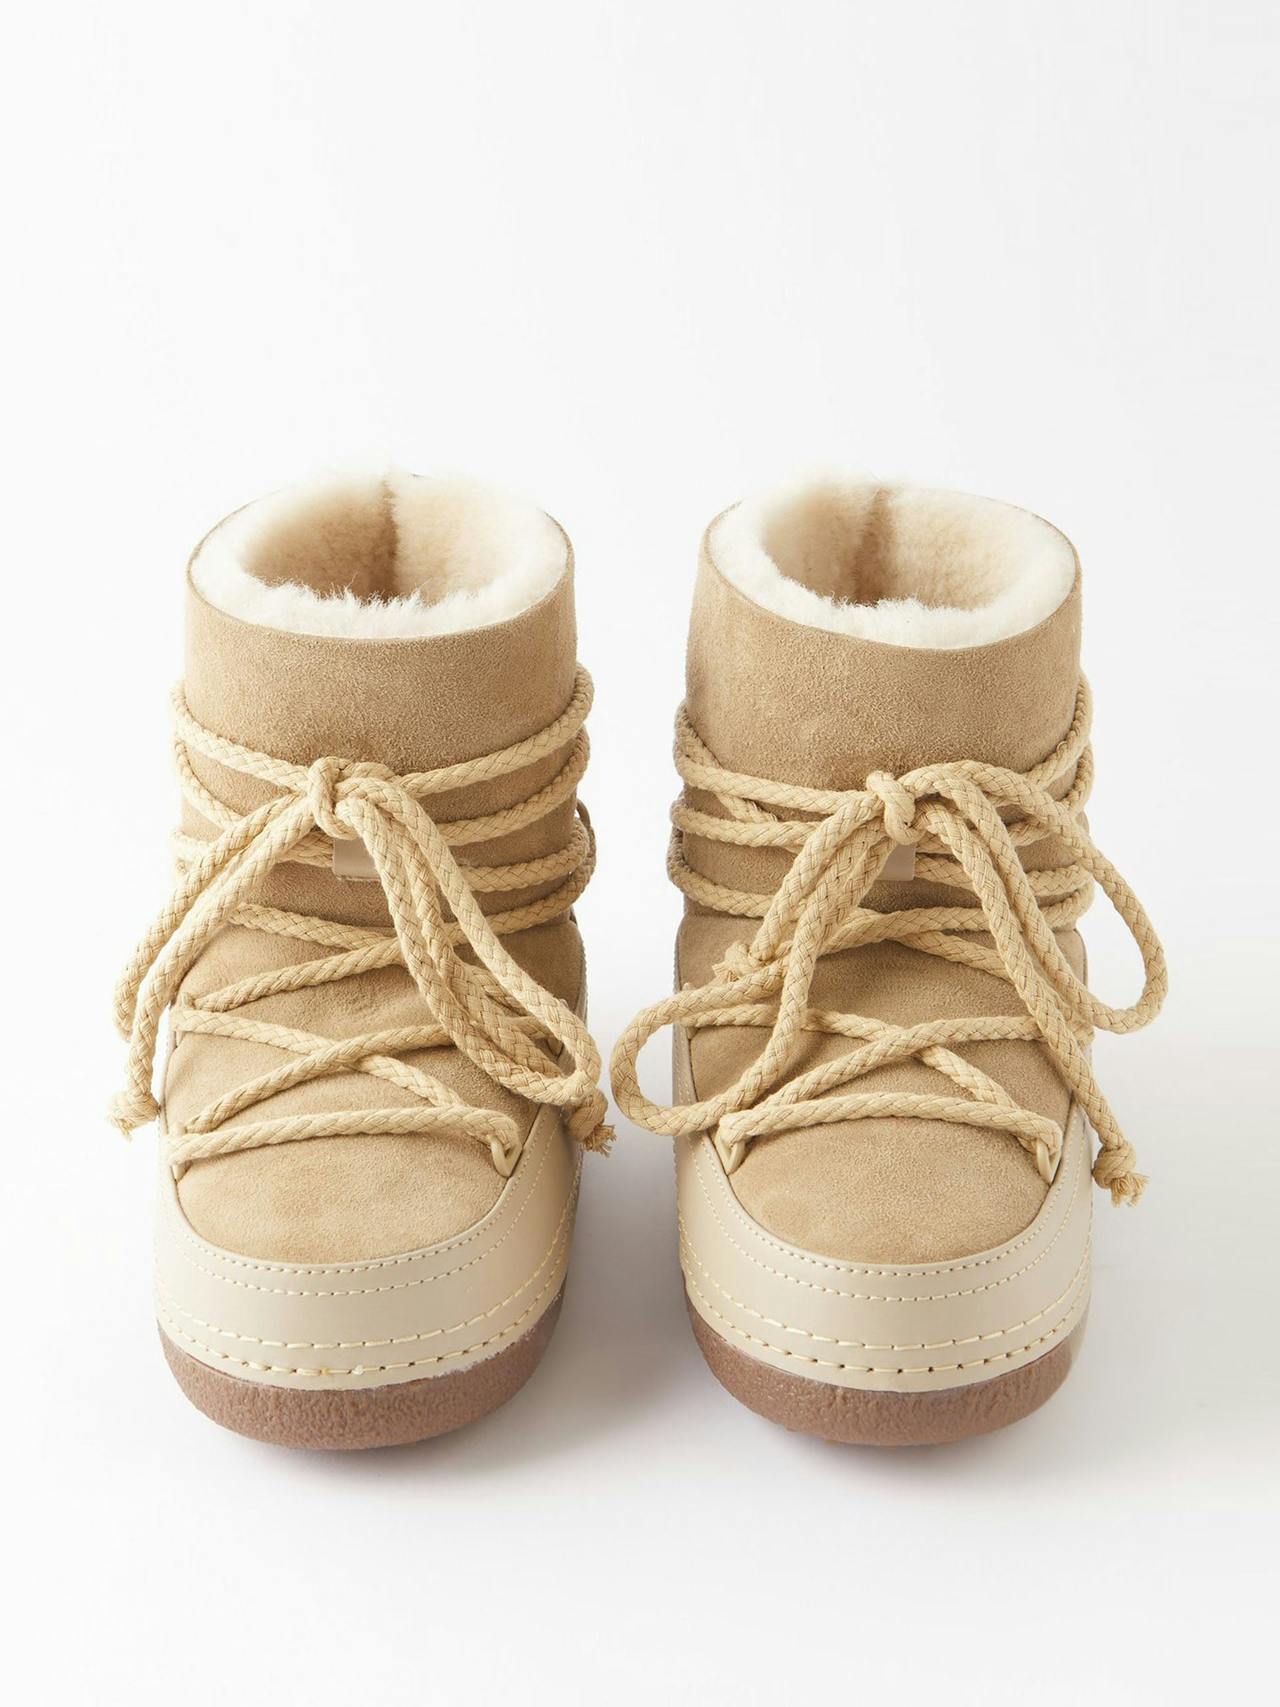 Classic suede lace-up boots